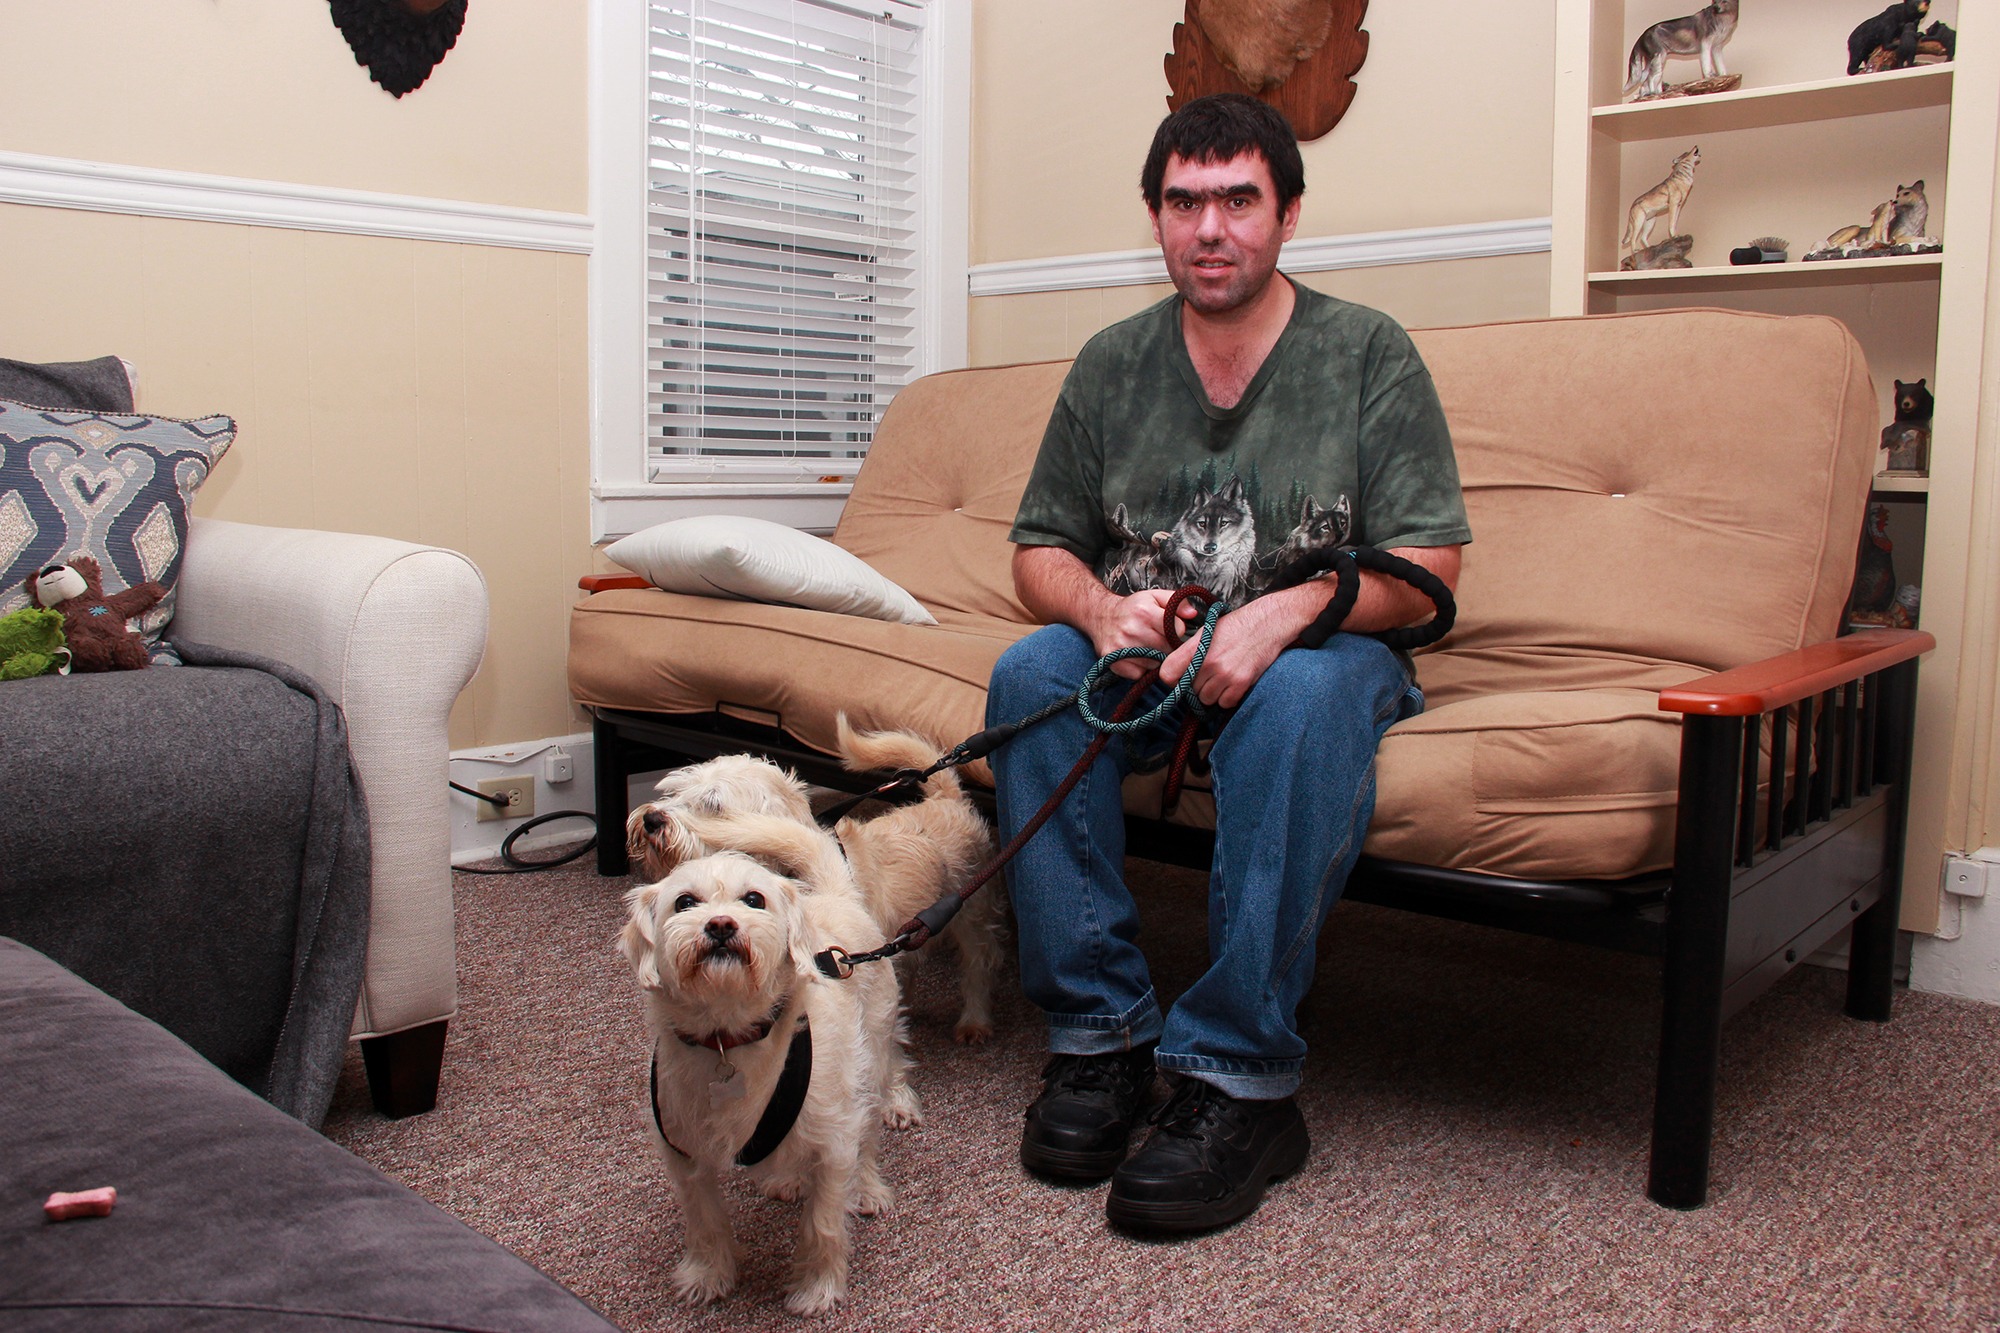 Patrick Toomey sitting on a futon couch in his living room with his two small terrier dogs on a leash.